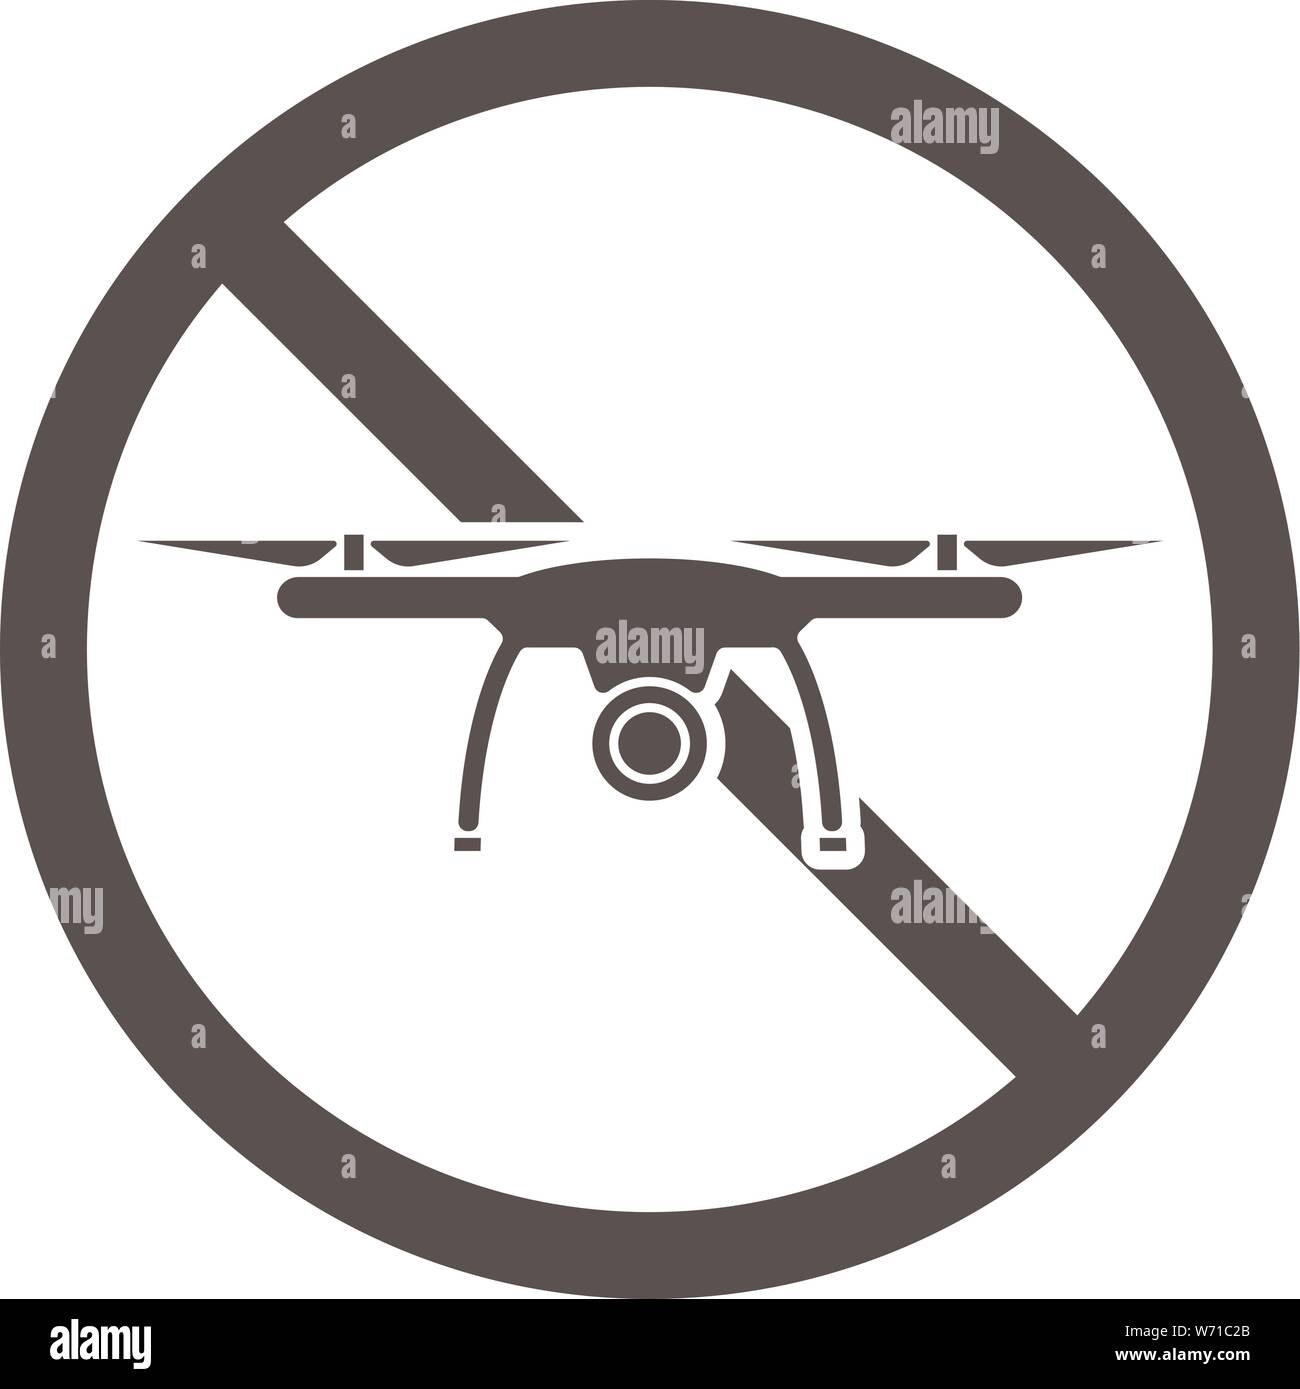 drones not allowed, drone prohibition sign or icon vector illustration Stock Vector